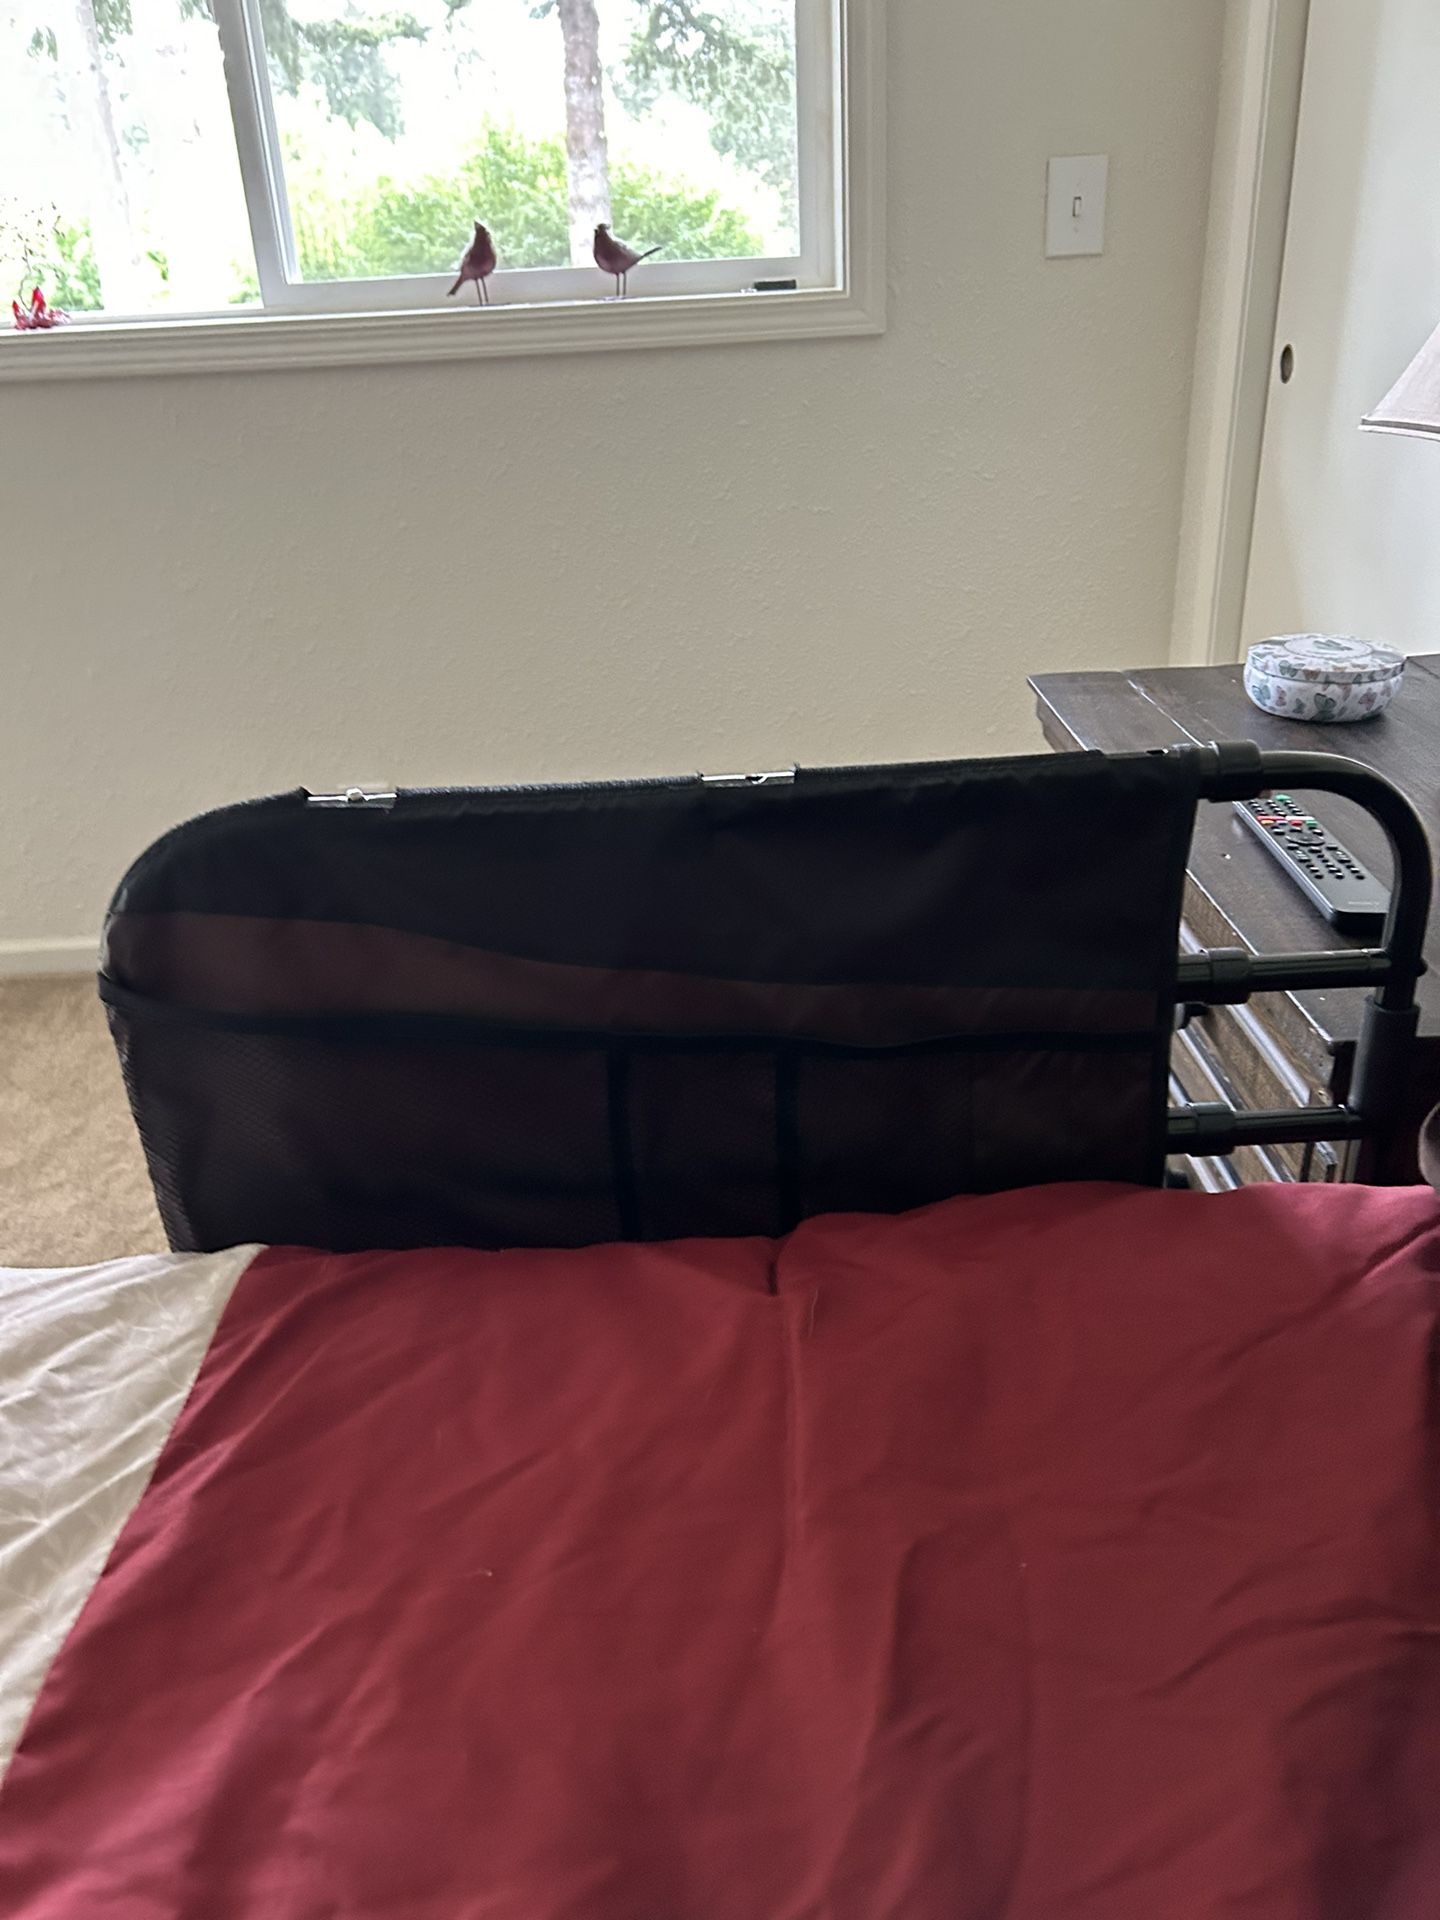 Adult Bed rails With Pockets On Both Sides (New)